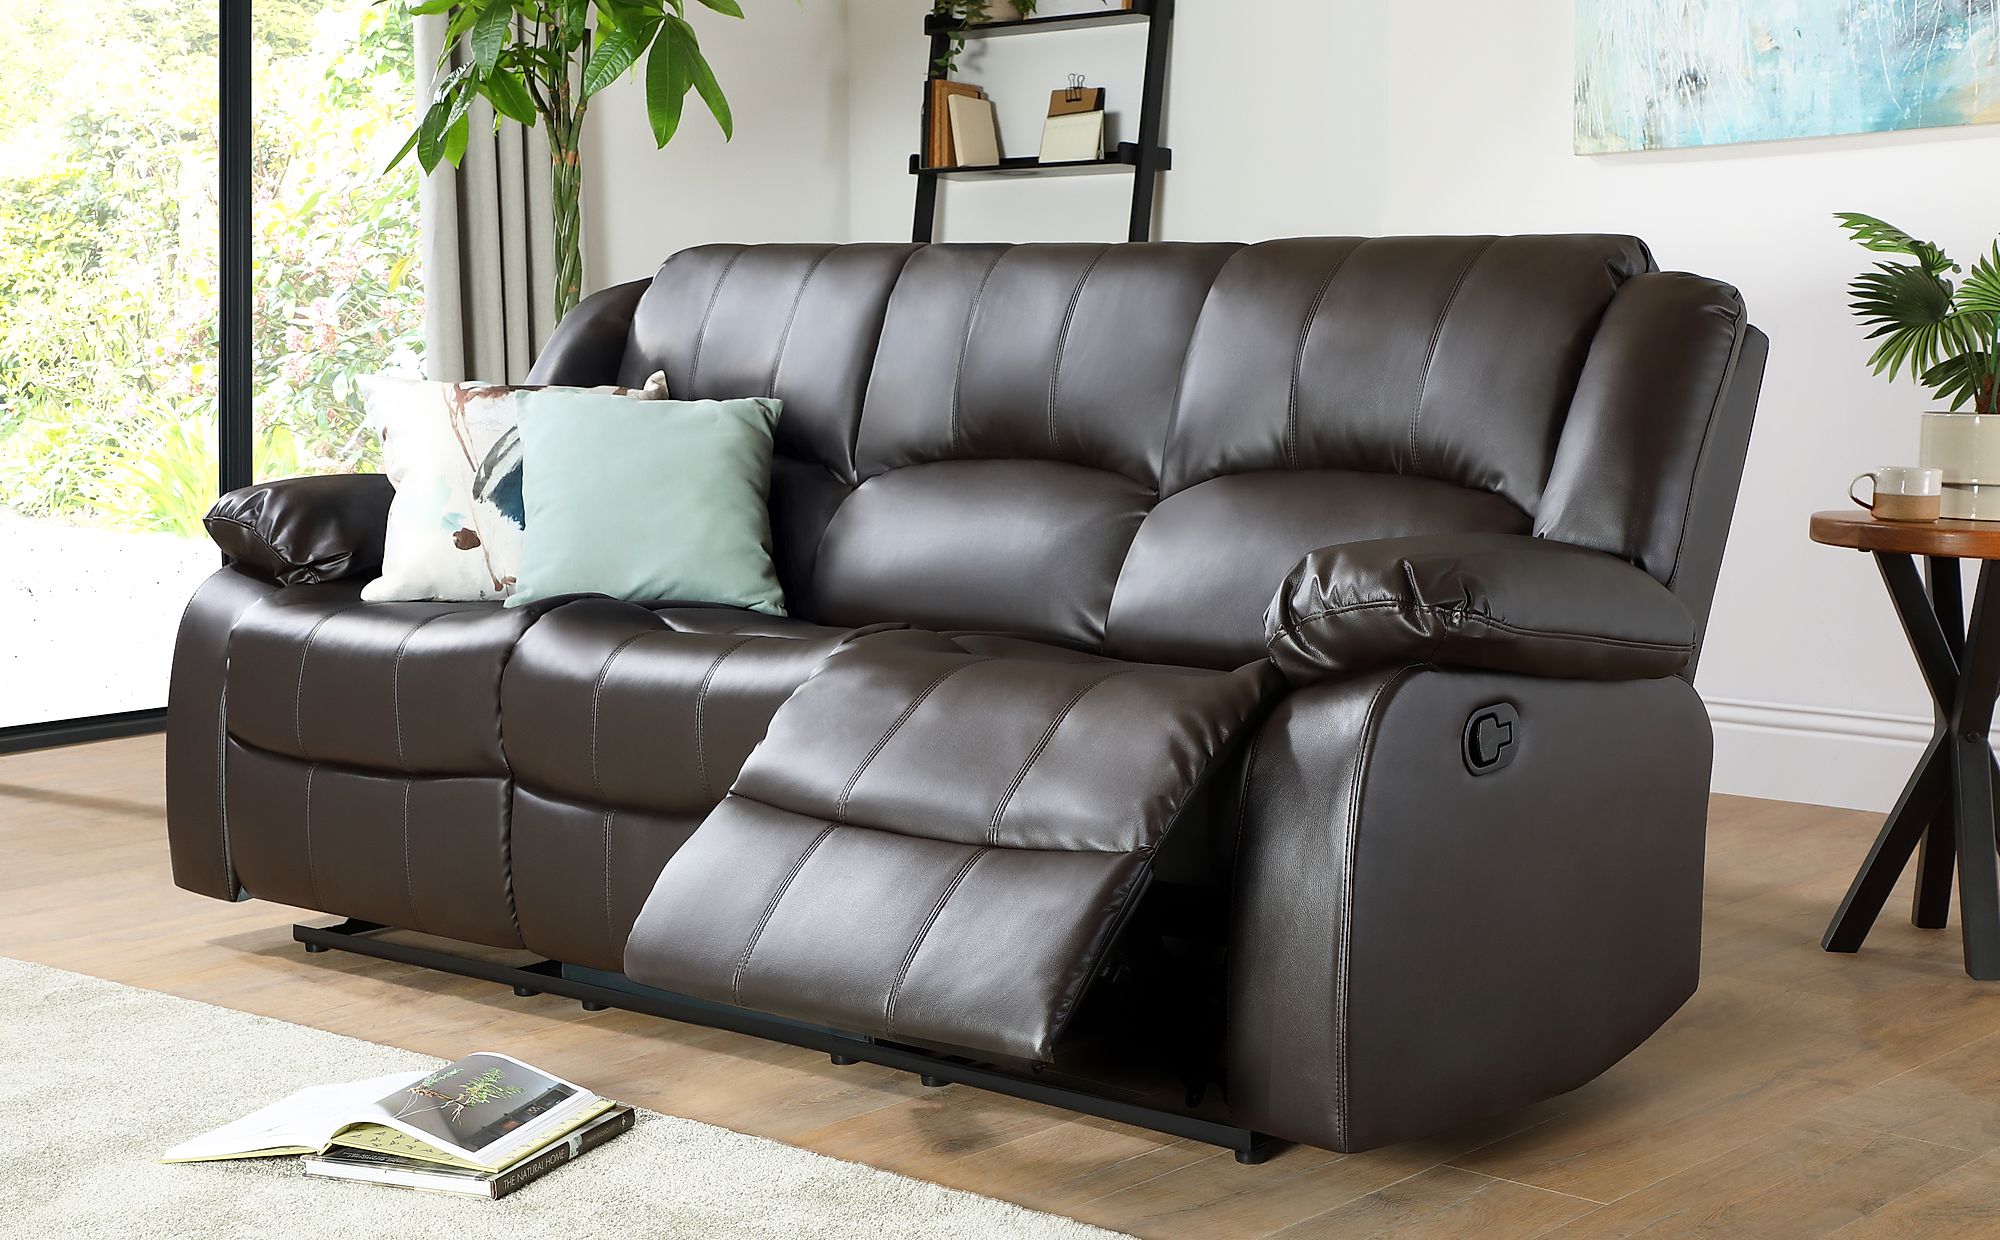 3 seater brown leather recliner sofa